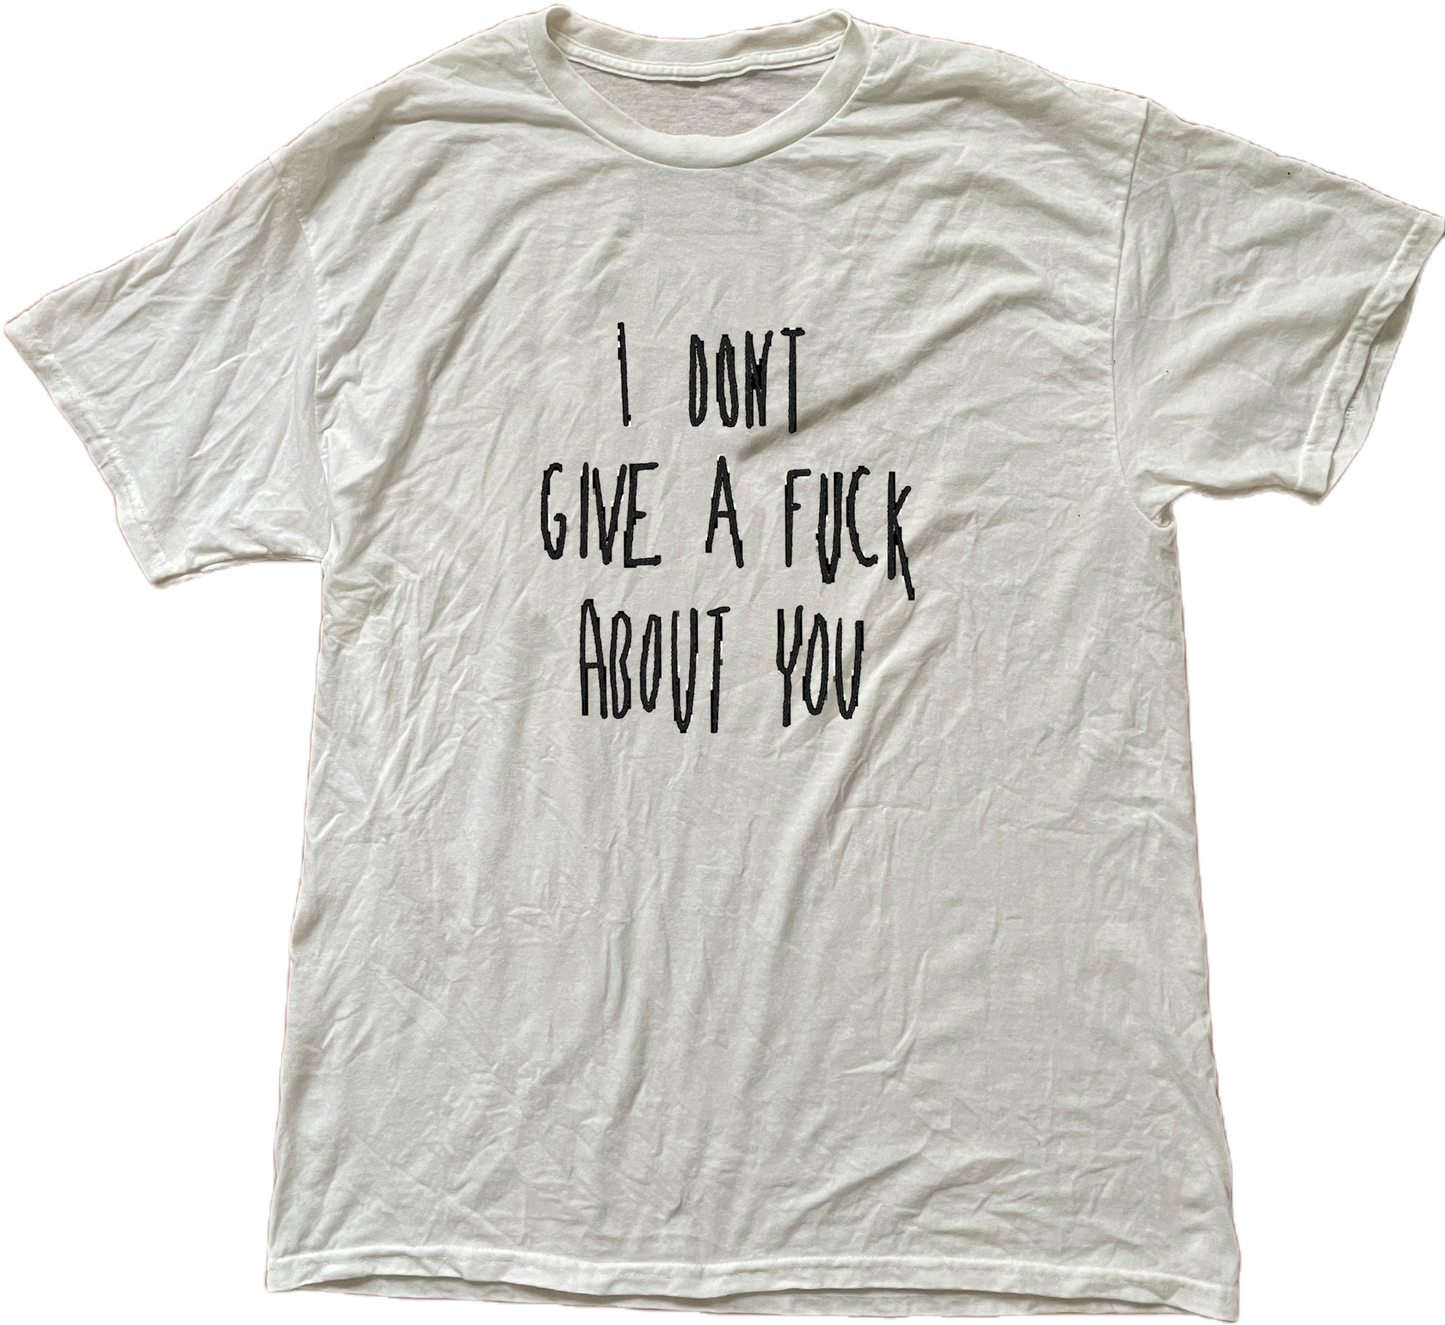 I DONT GIVE A FUCK TSHIRT